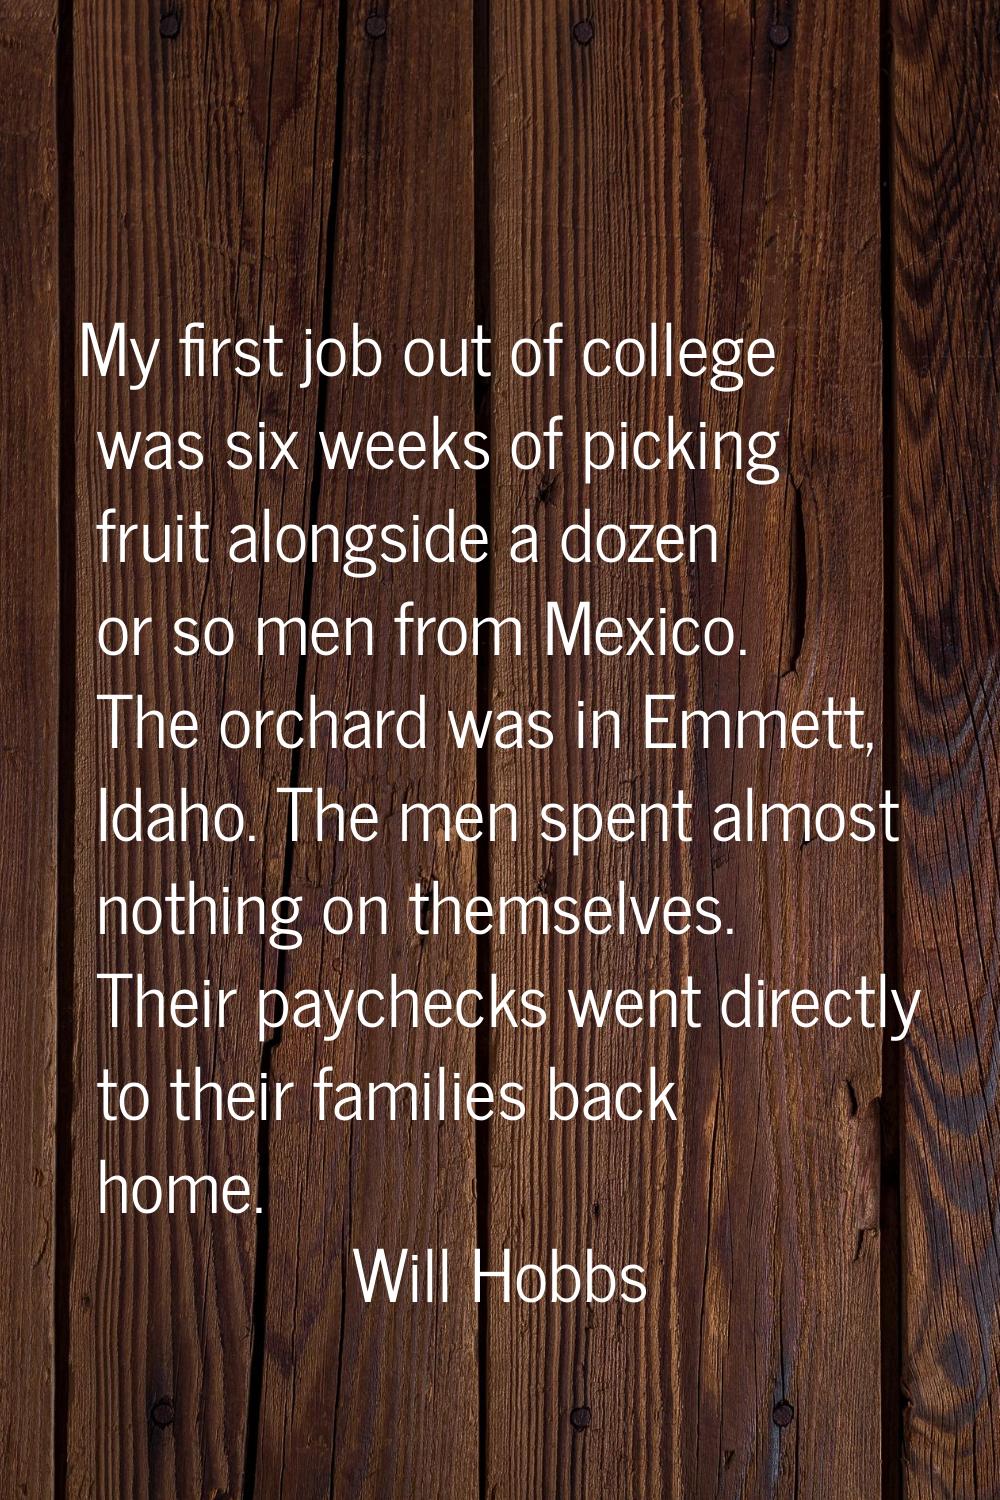 My first job out of college was six weeks of picking fruit alongside a dozen or so men from Mexico.